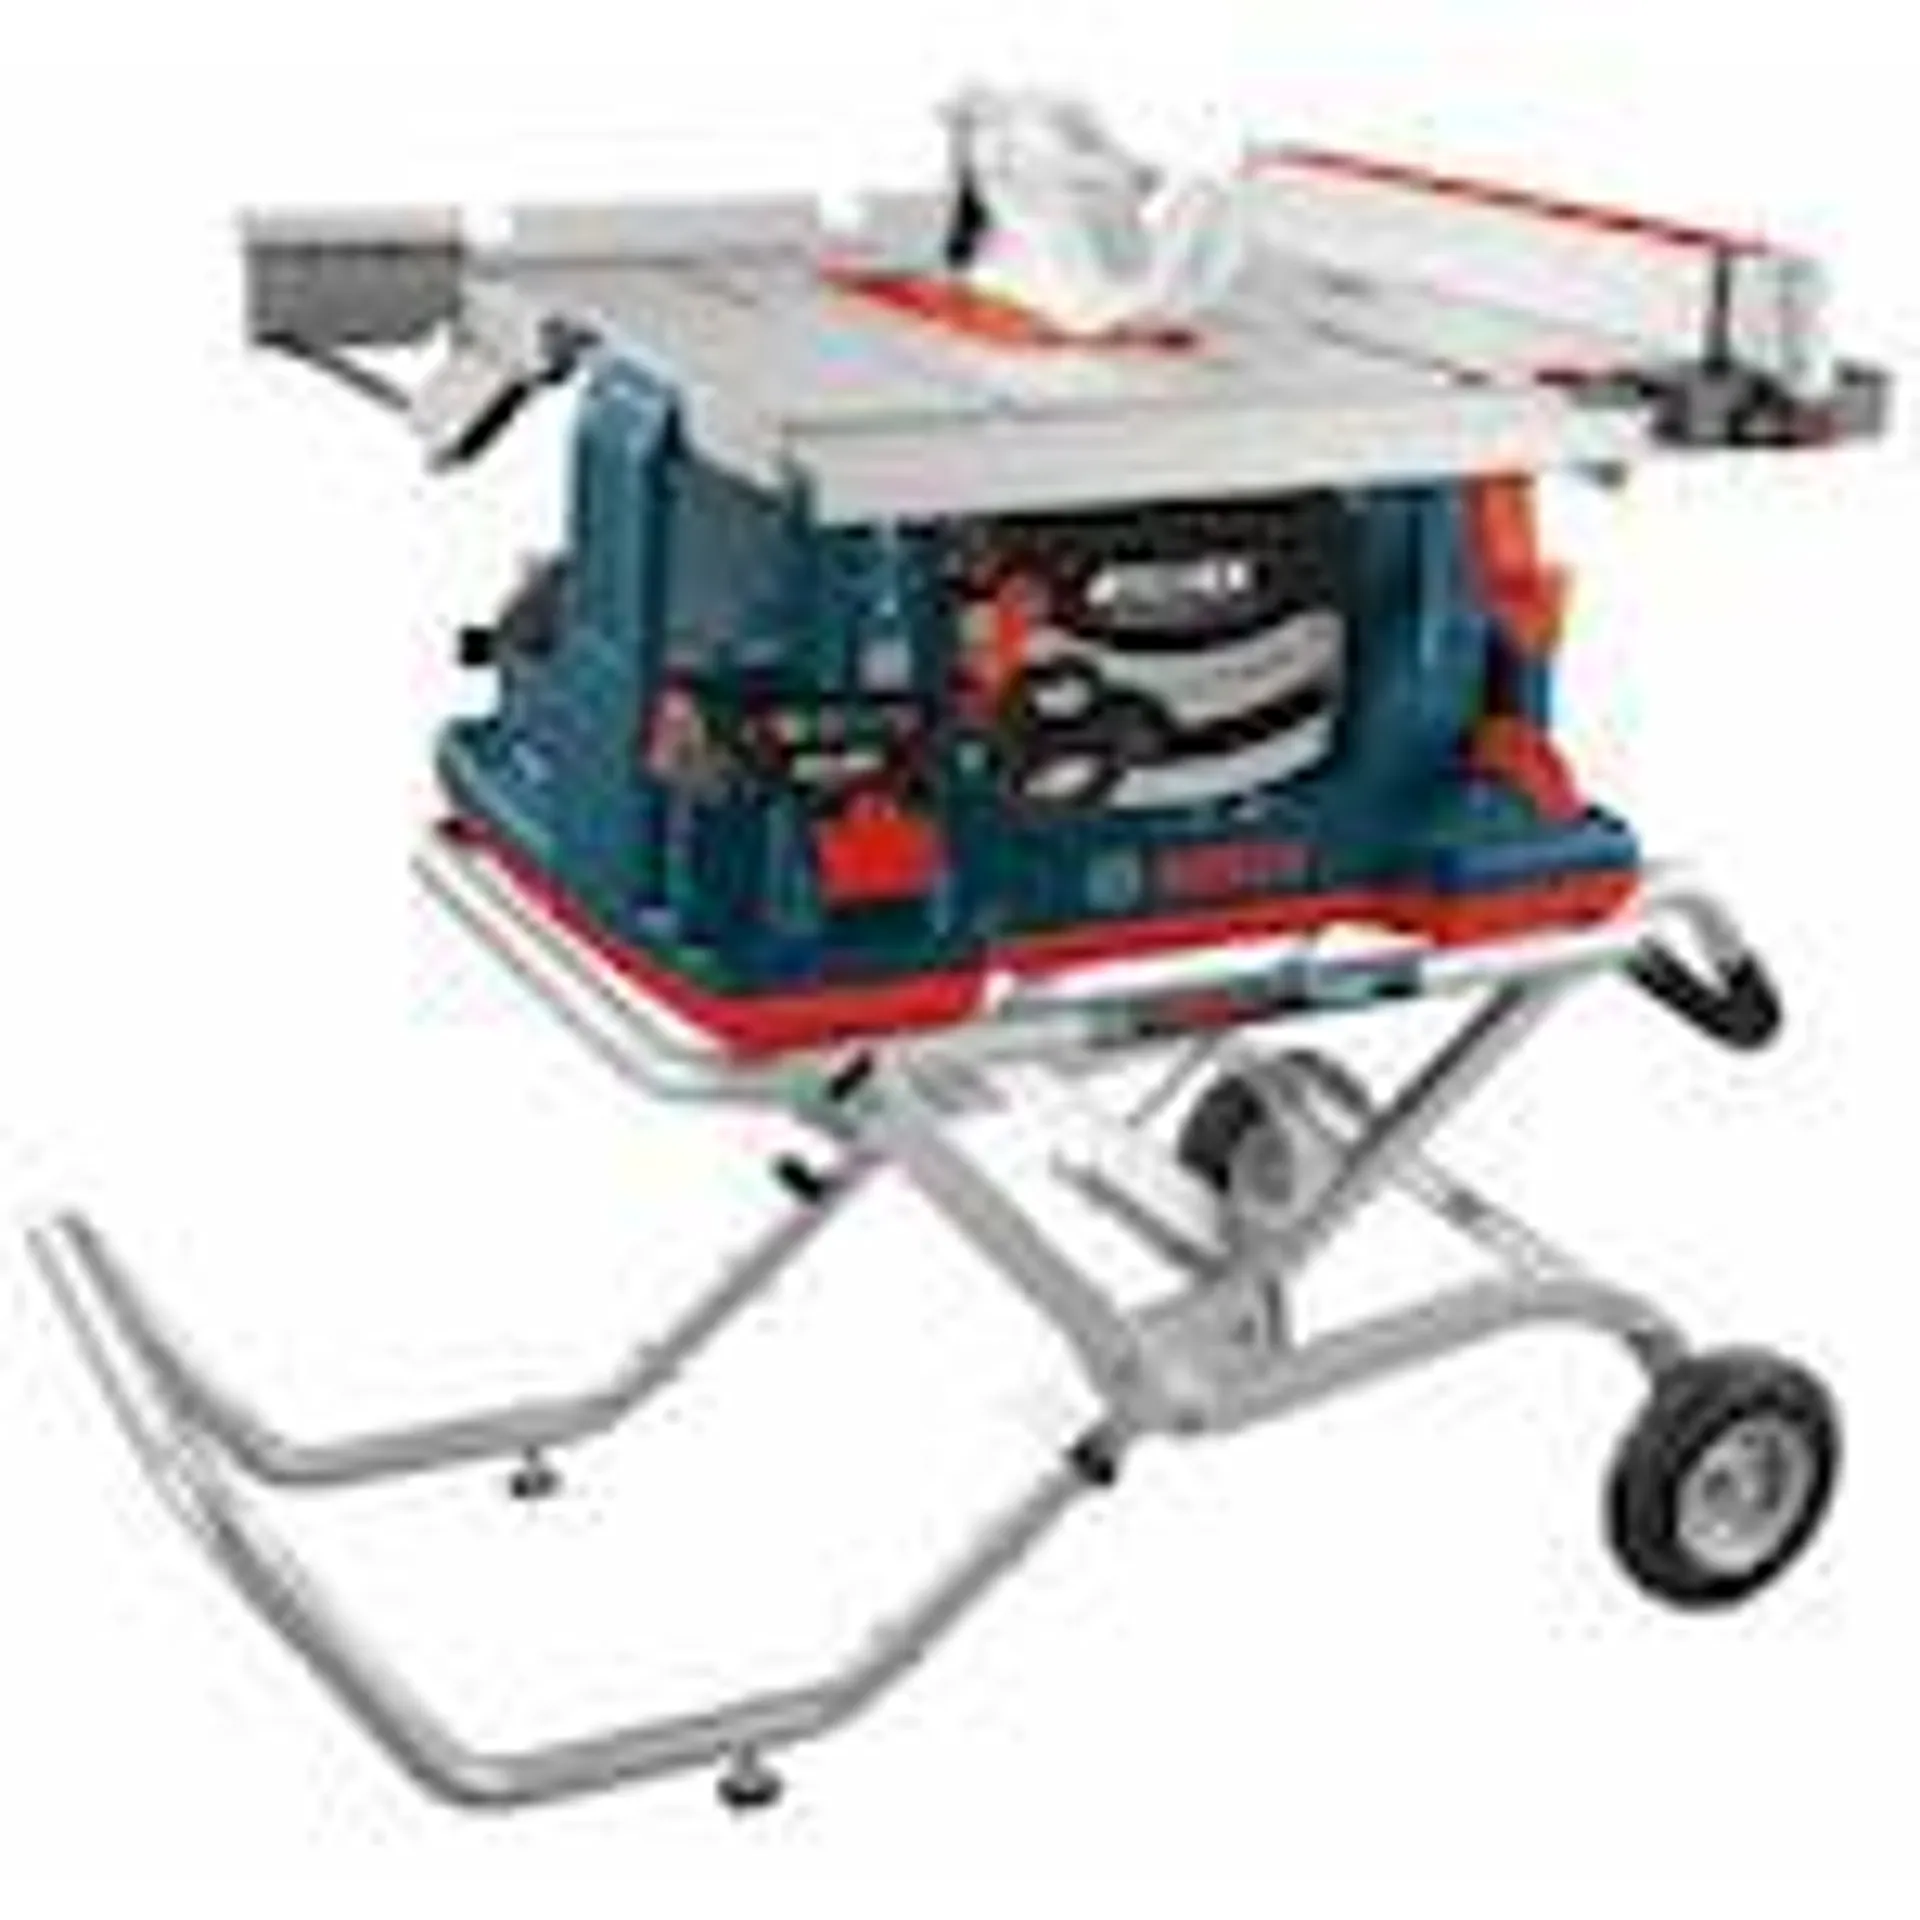 110-120V 10-inch Jobsite Table Saw Stand with Gravity Rise Wheels and Blade Guard System